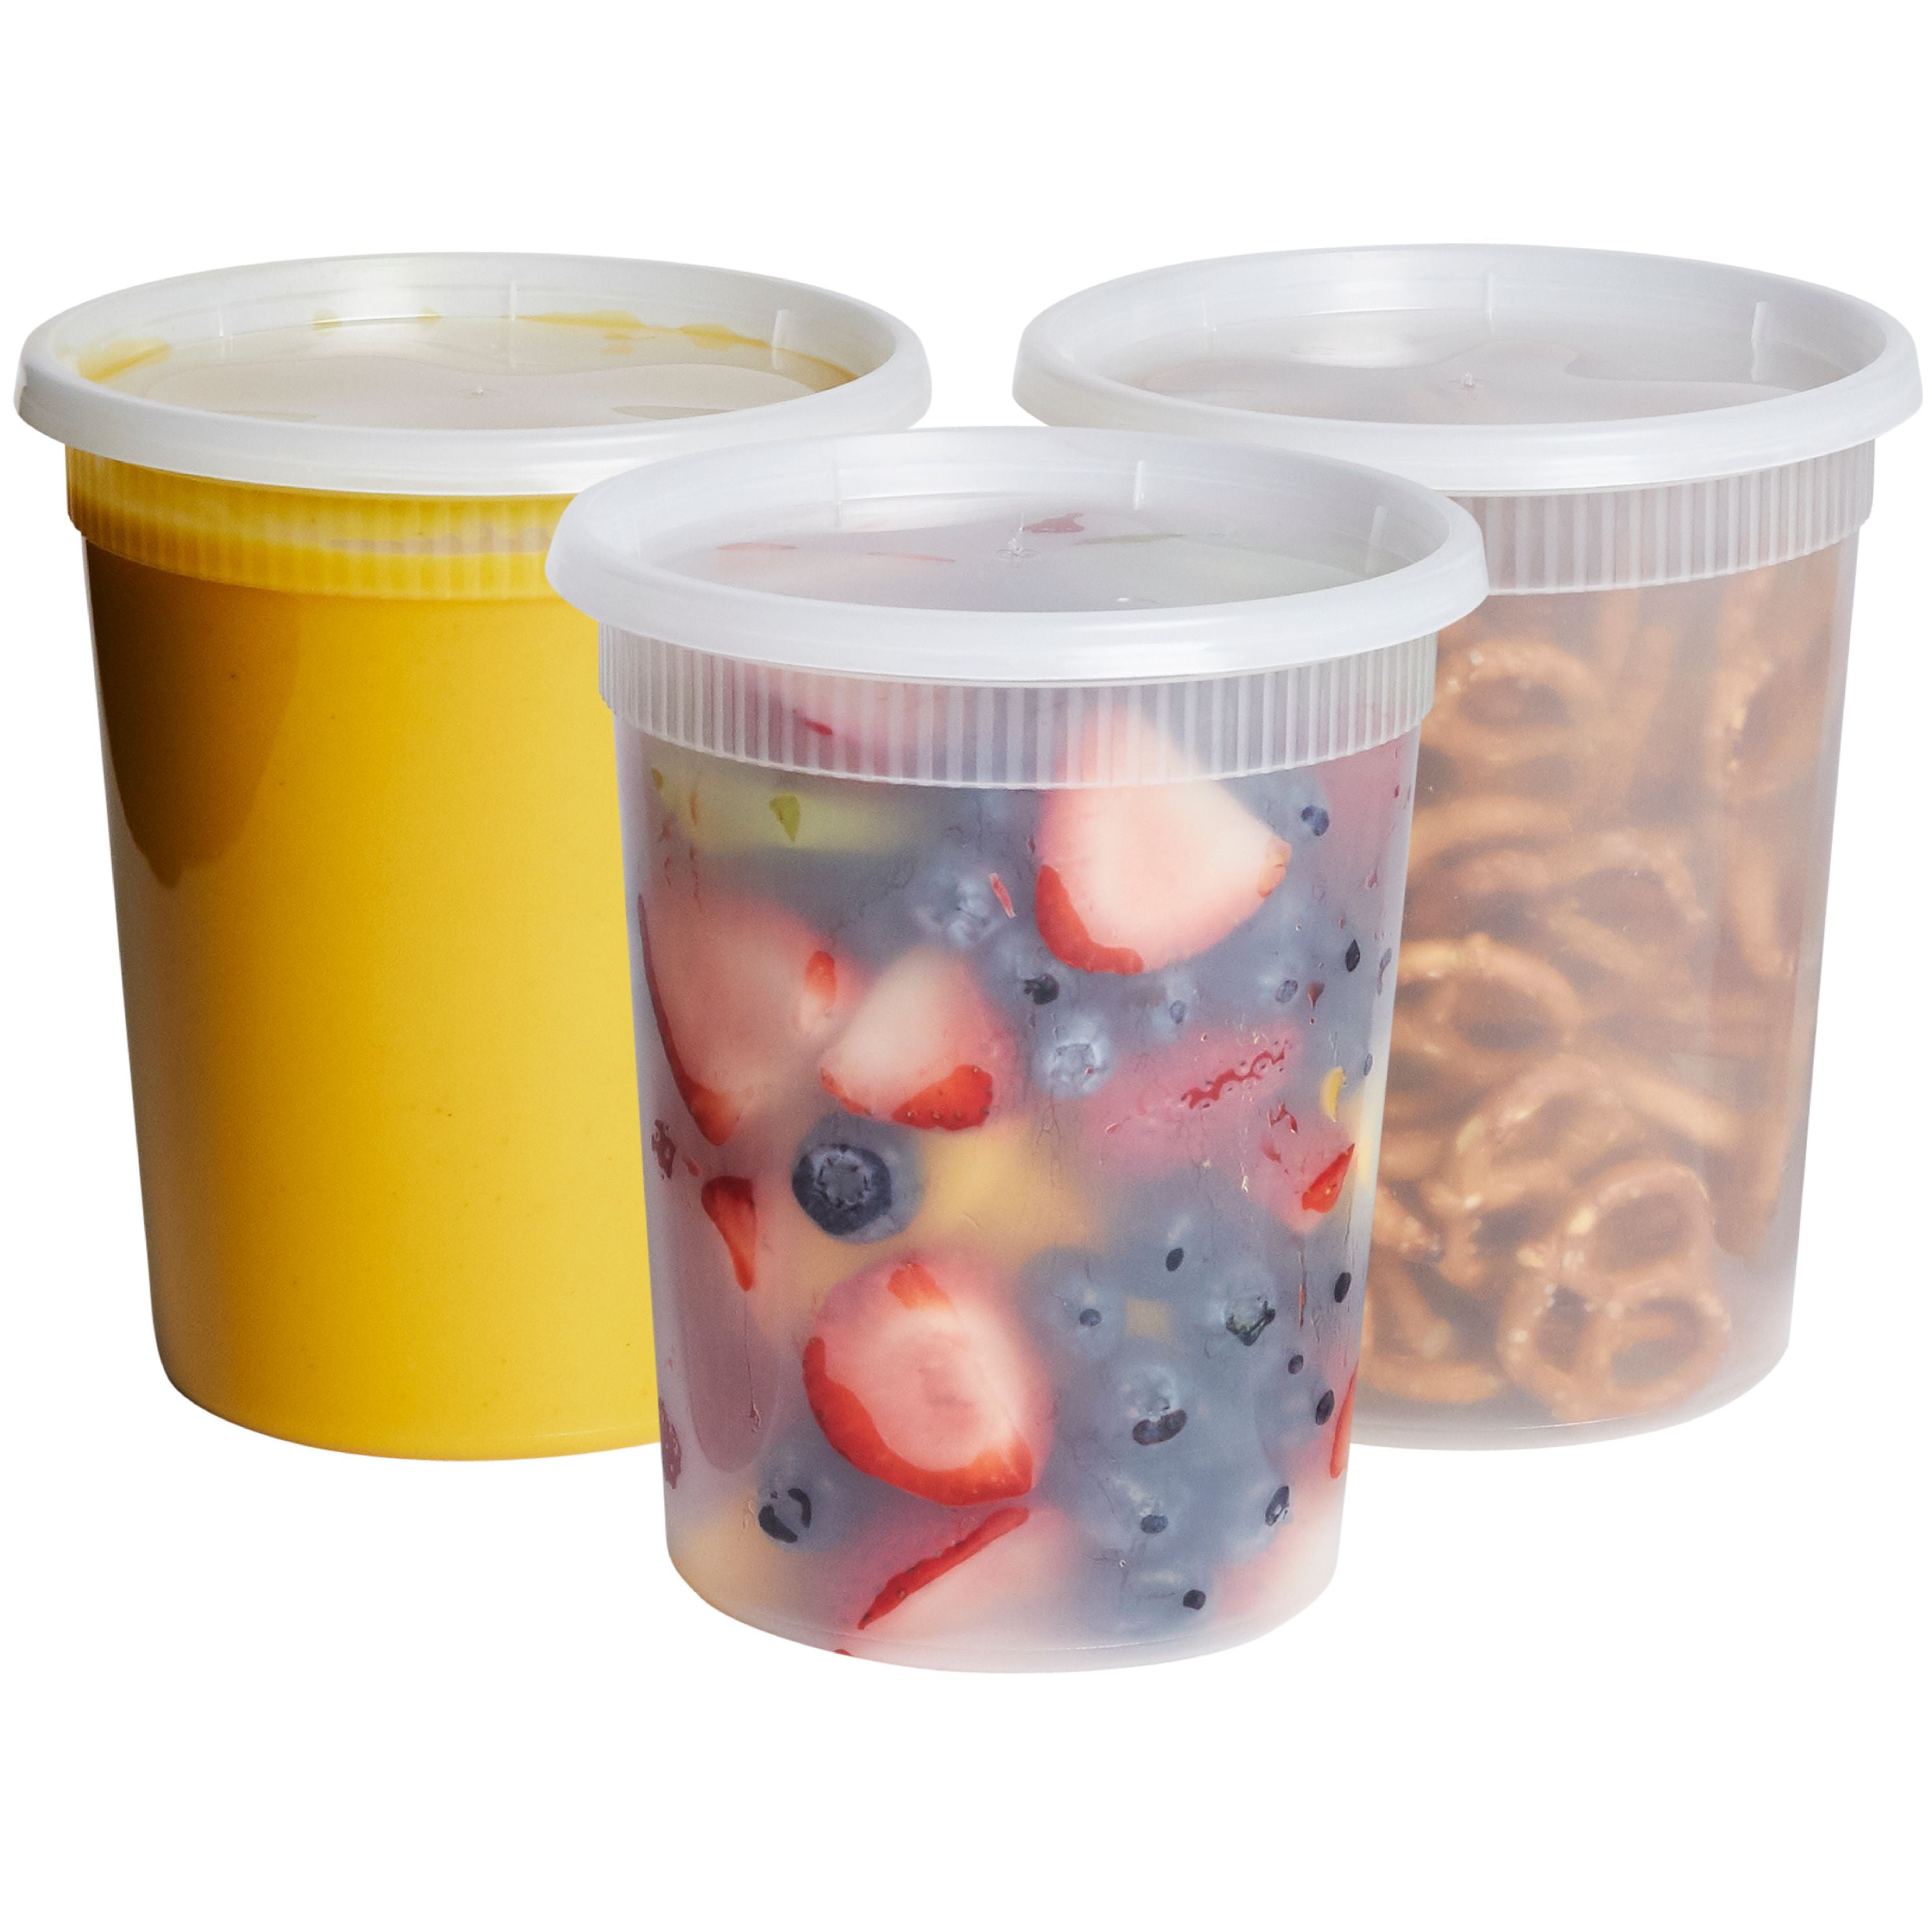 16-Ounce Reditainer Deli Food Storage Containers with Lid 36-Pack 